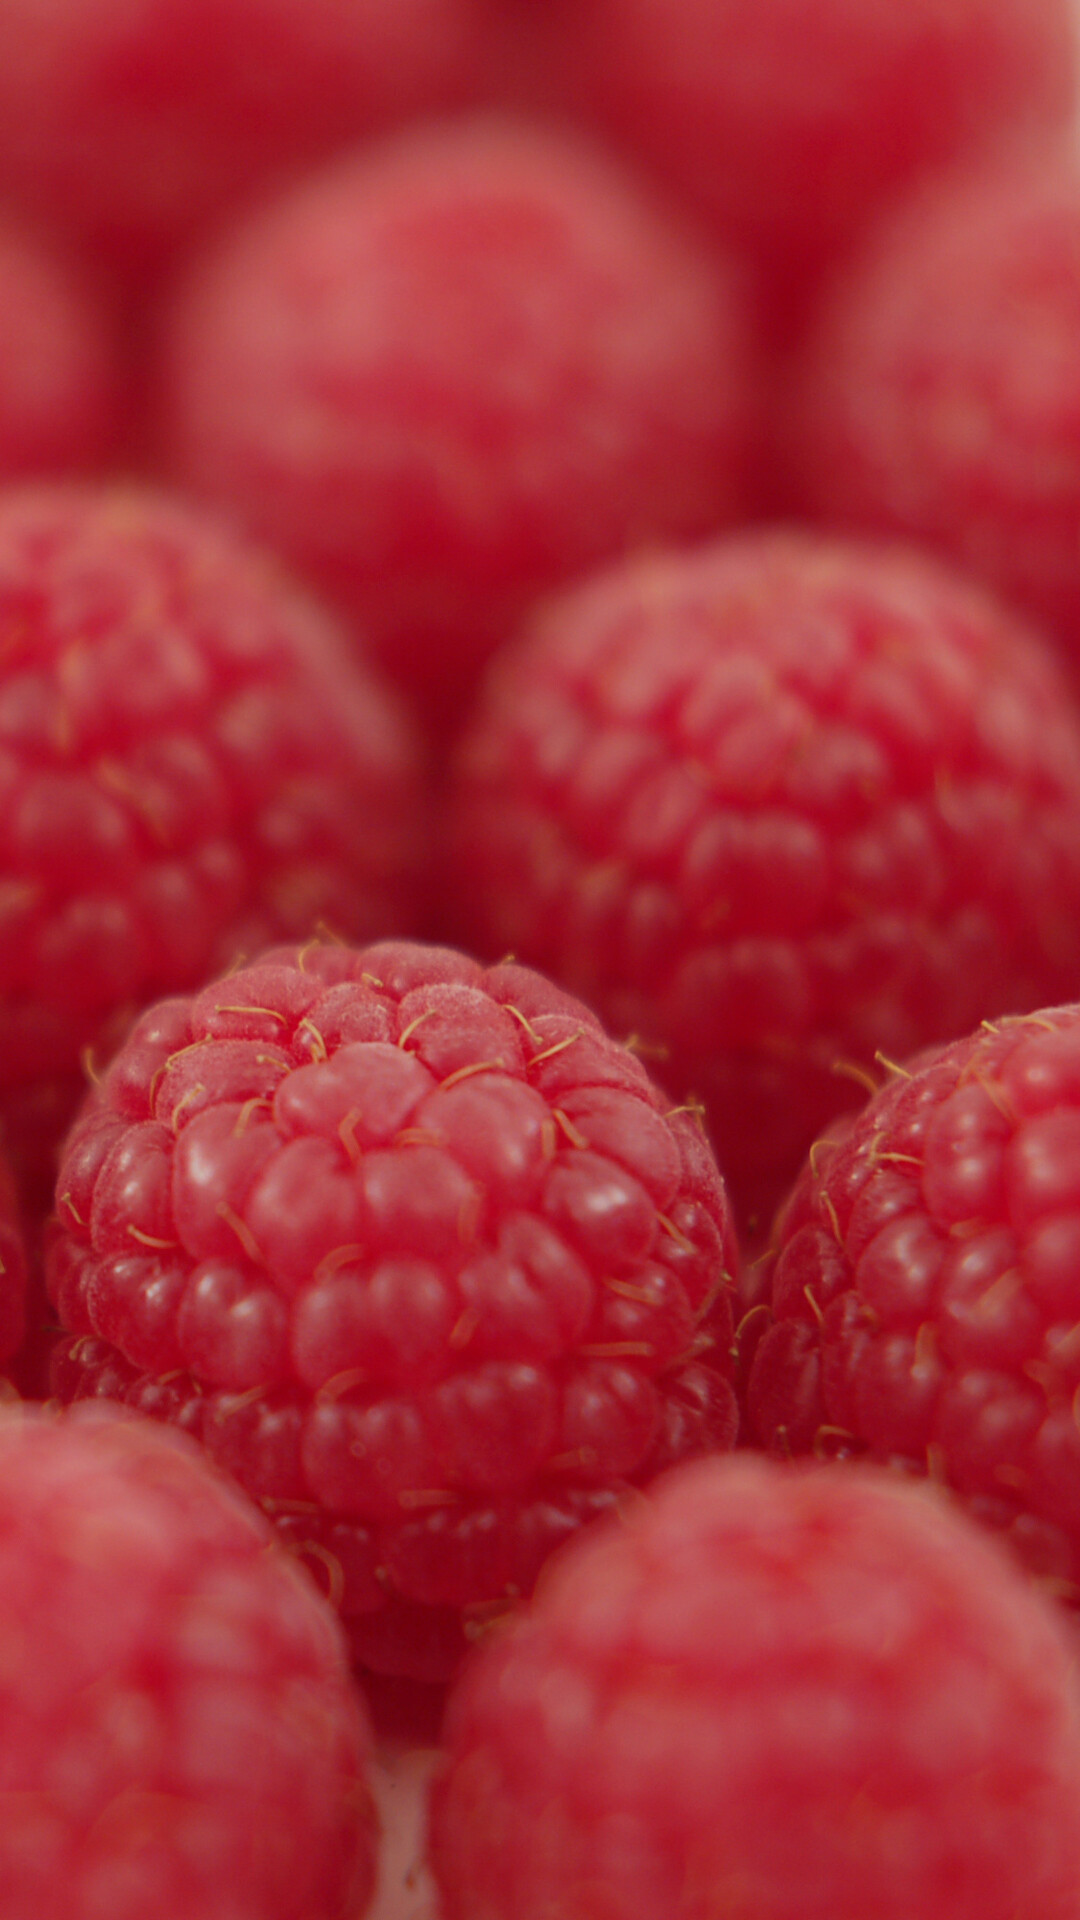 Fruit: Raspberry, A popular berry with a rich color and sweet juicy taste. 1080x1920 Full HD Wallpaper.